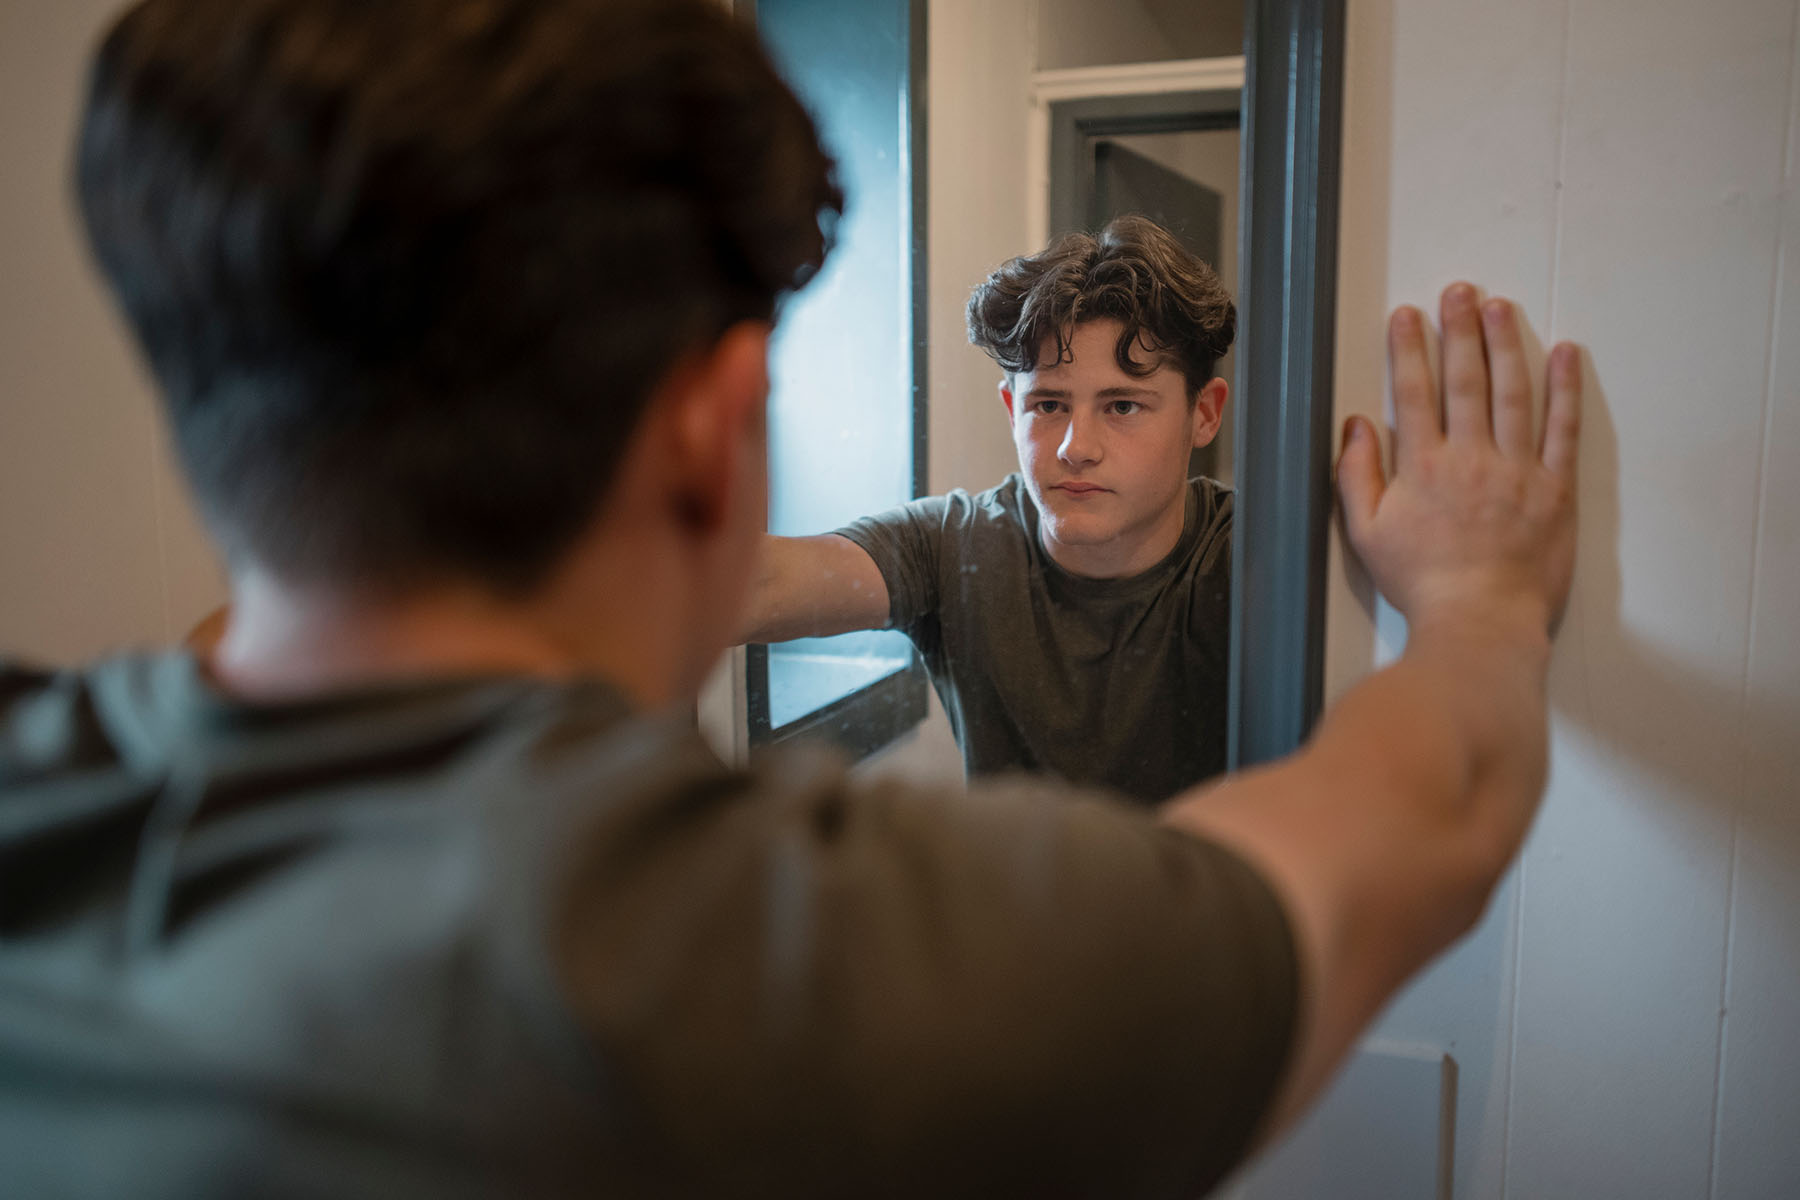 Teen boy looks frustrated, tired in mirror